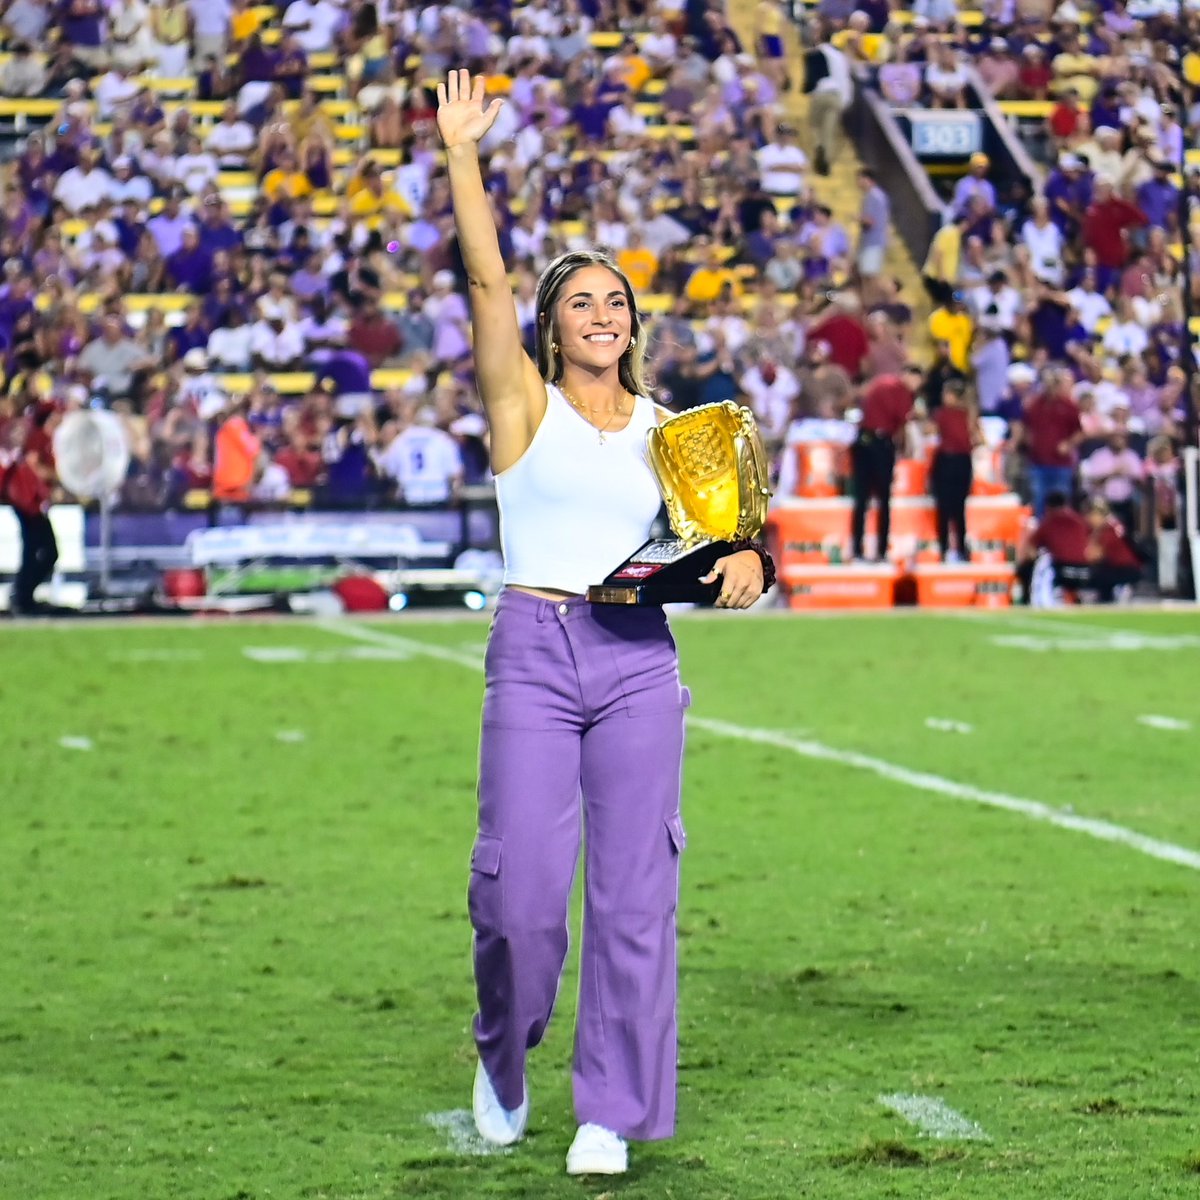 A Tiger Stadium salute to college softball’s only Back-to-Back Gold Glove Award winner! @ciarabriggs88 #GeauxTigers